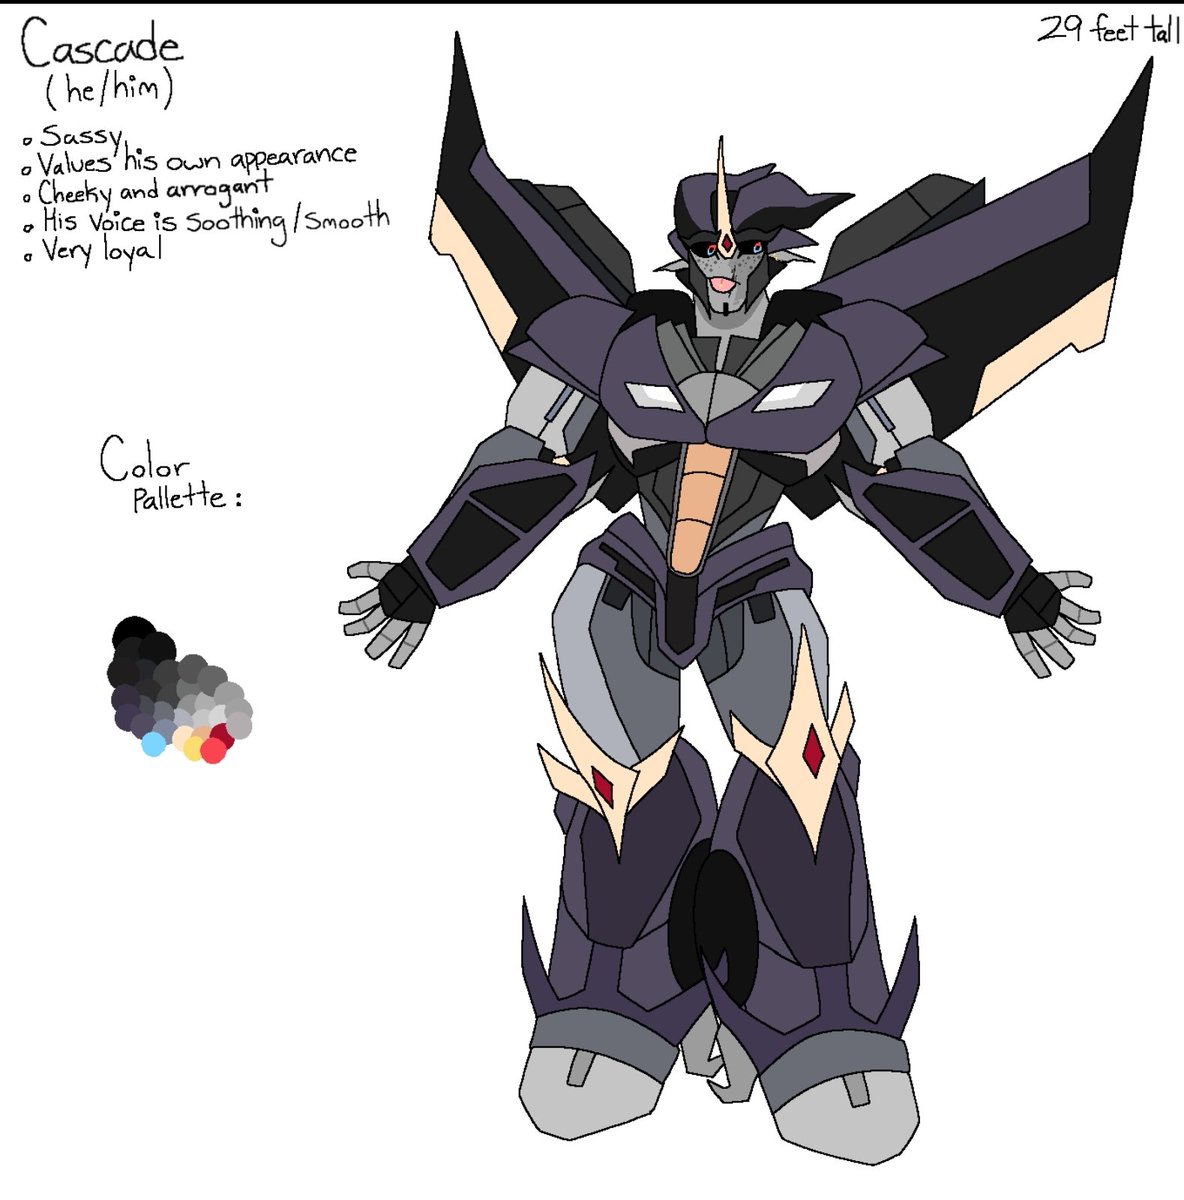 I might redesign Cascade while I'm at it-

#transformersoc 
#transformers 
#starknock
#tfoc